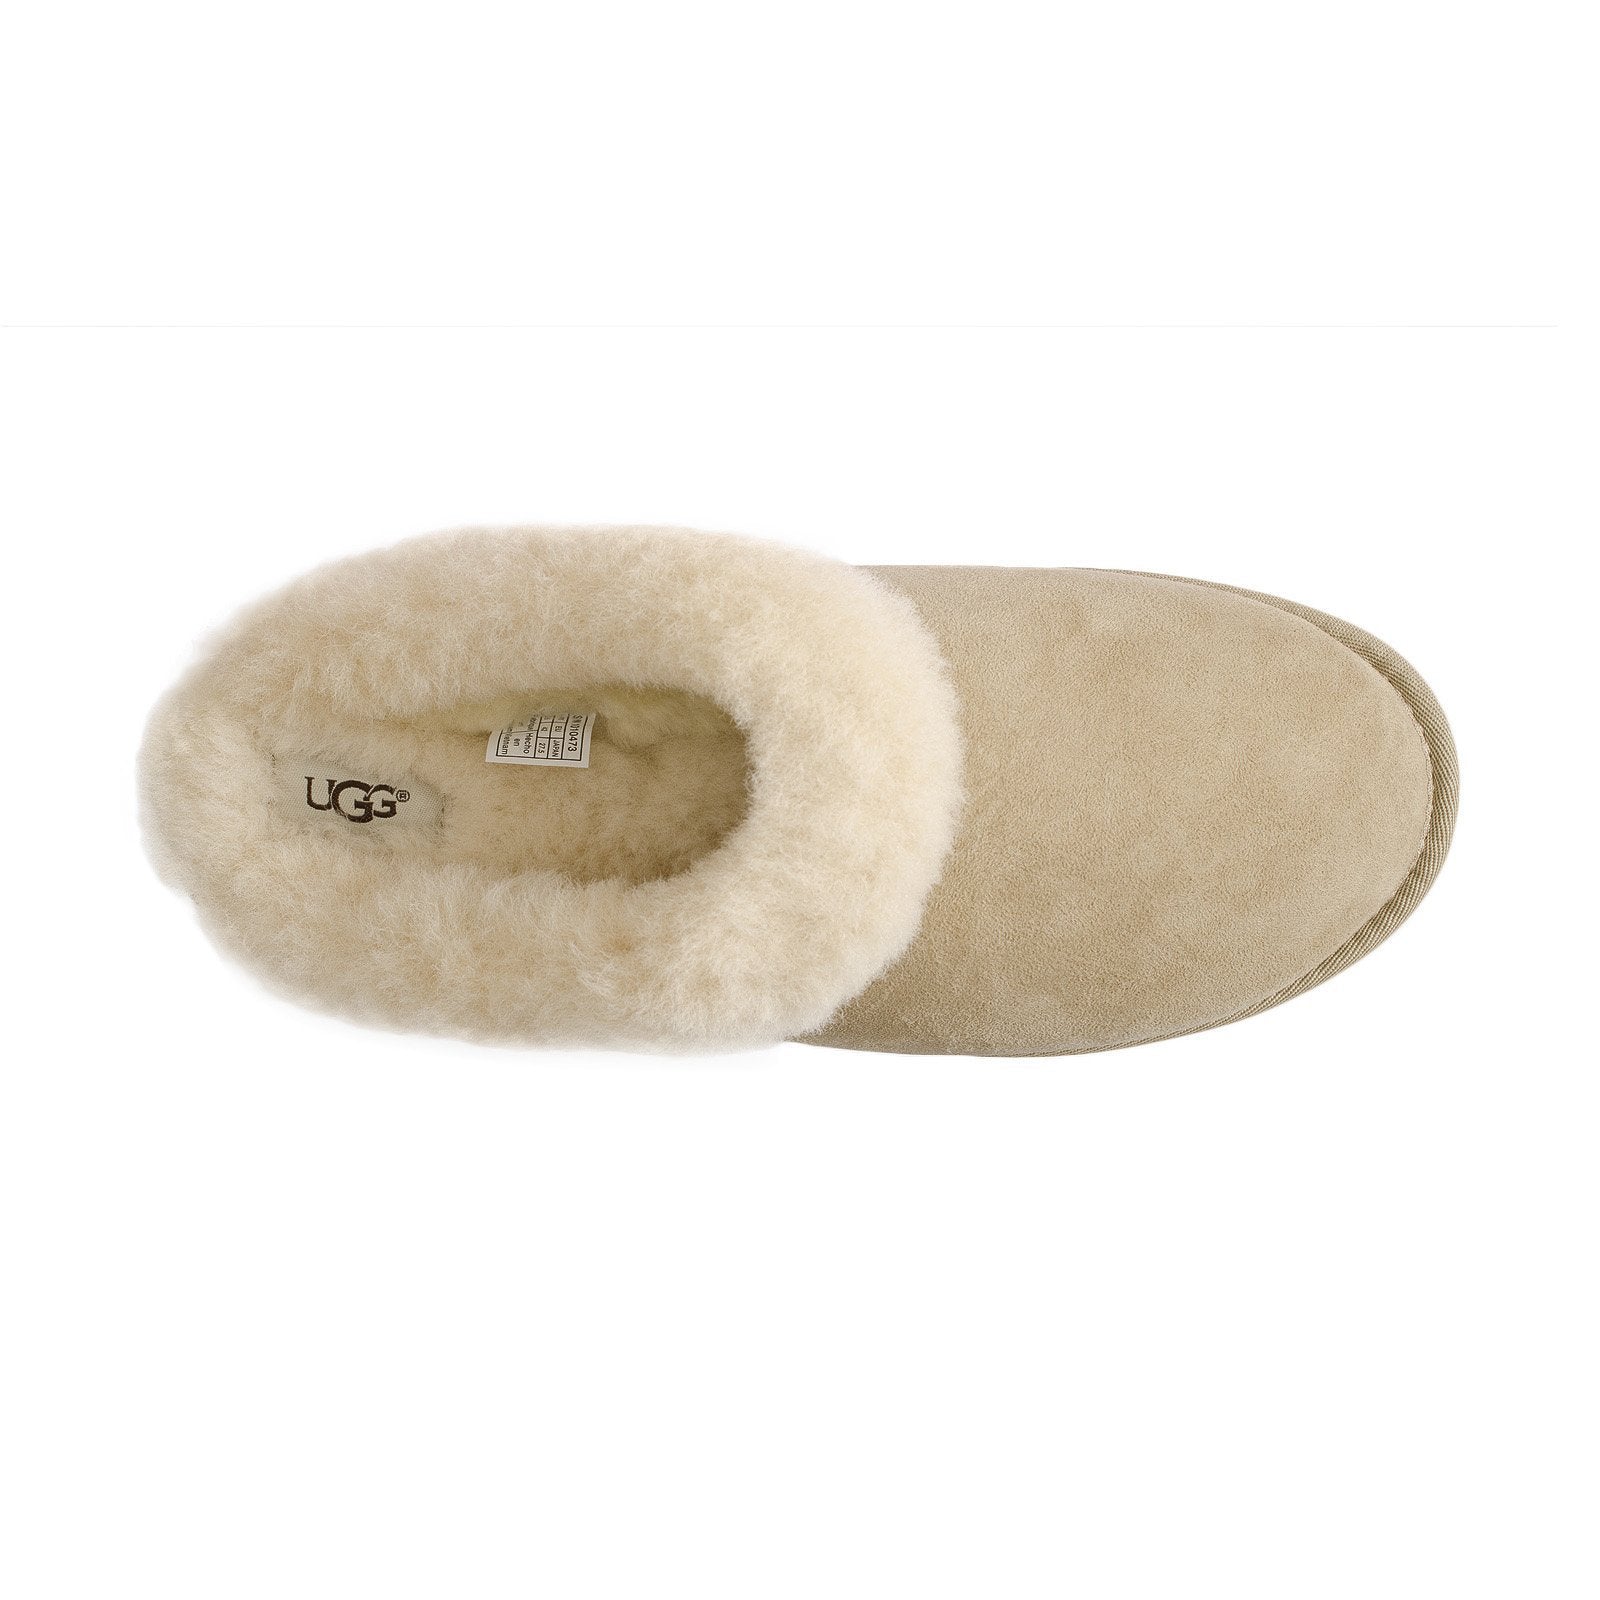 UGG Cluggette Sand Slippers - Women's – MyCozyBoots